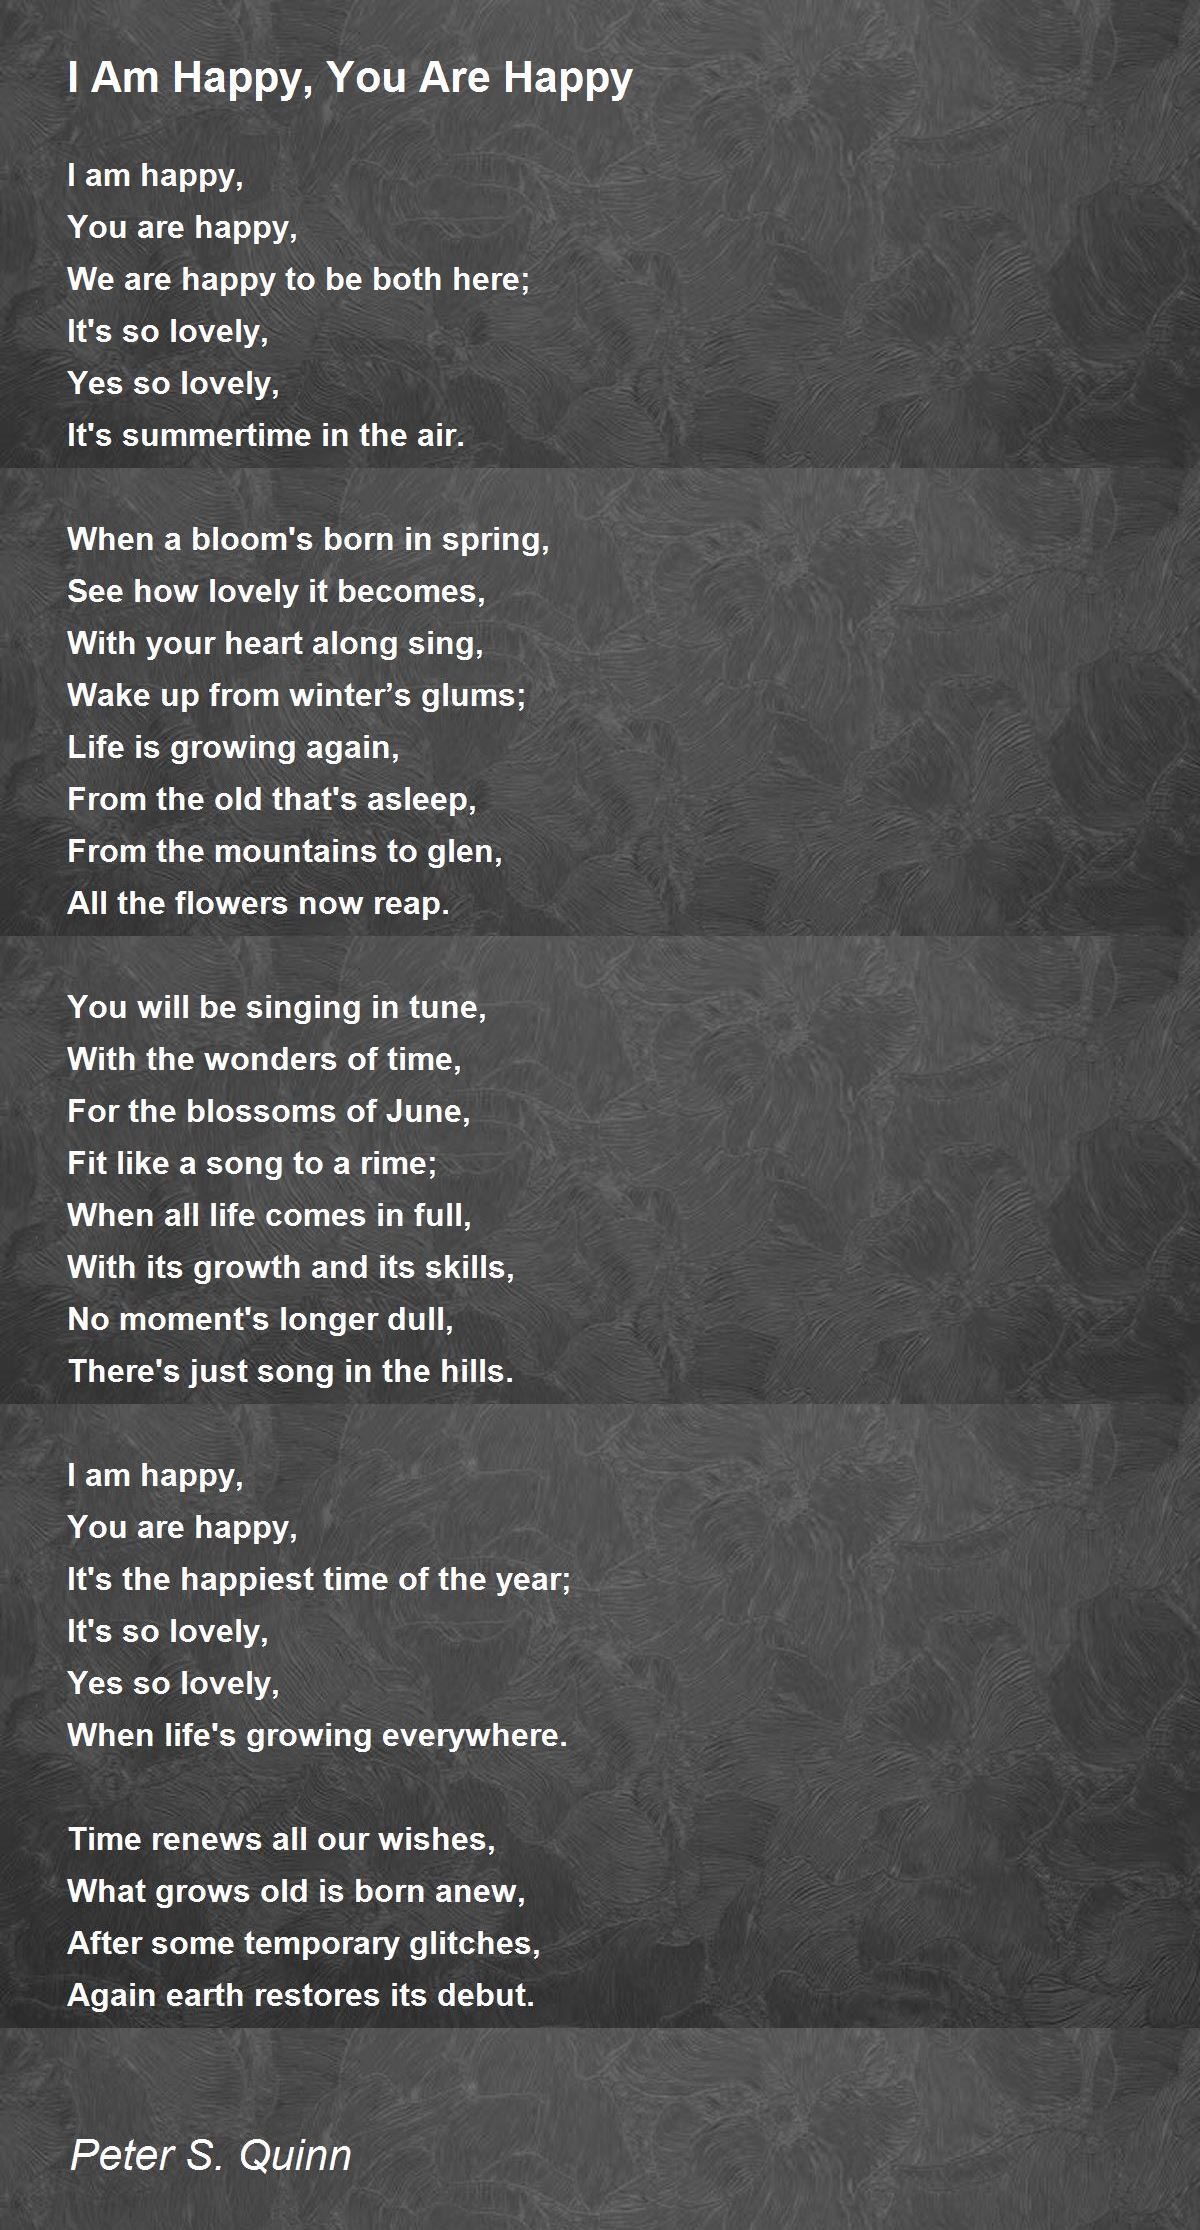 I Am Happy You Are Happy Poem By Peter S Quinn Poem Hunter